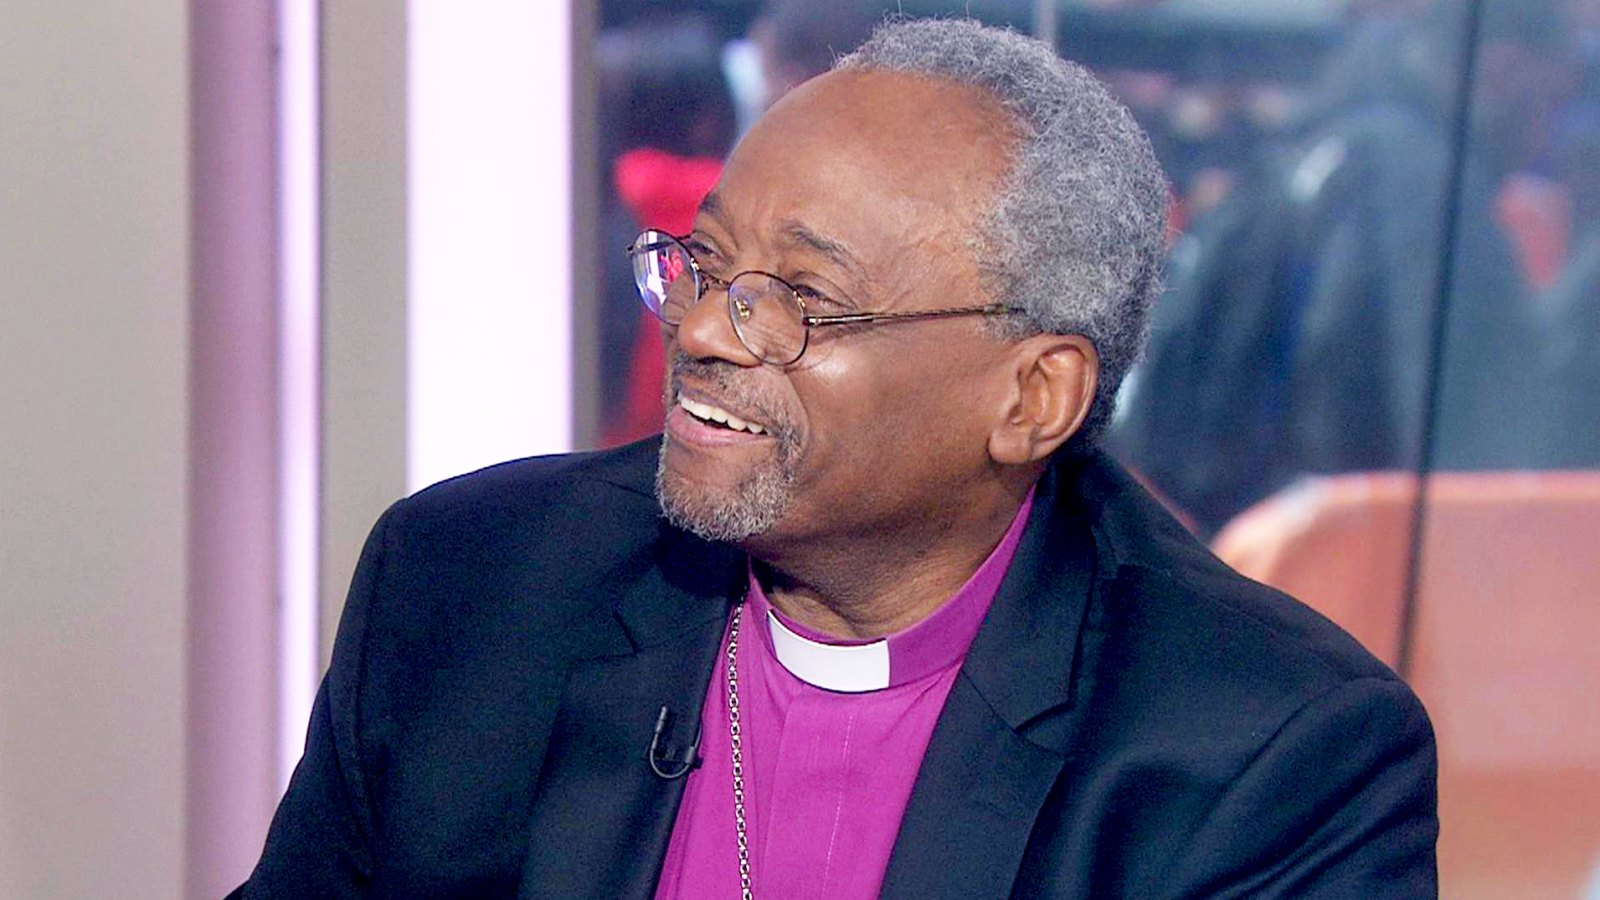 Bishop Michael Curry on ‘Today‘ show